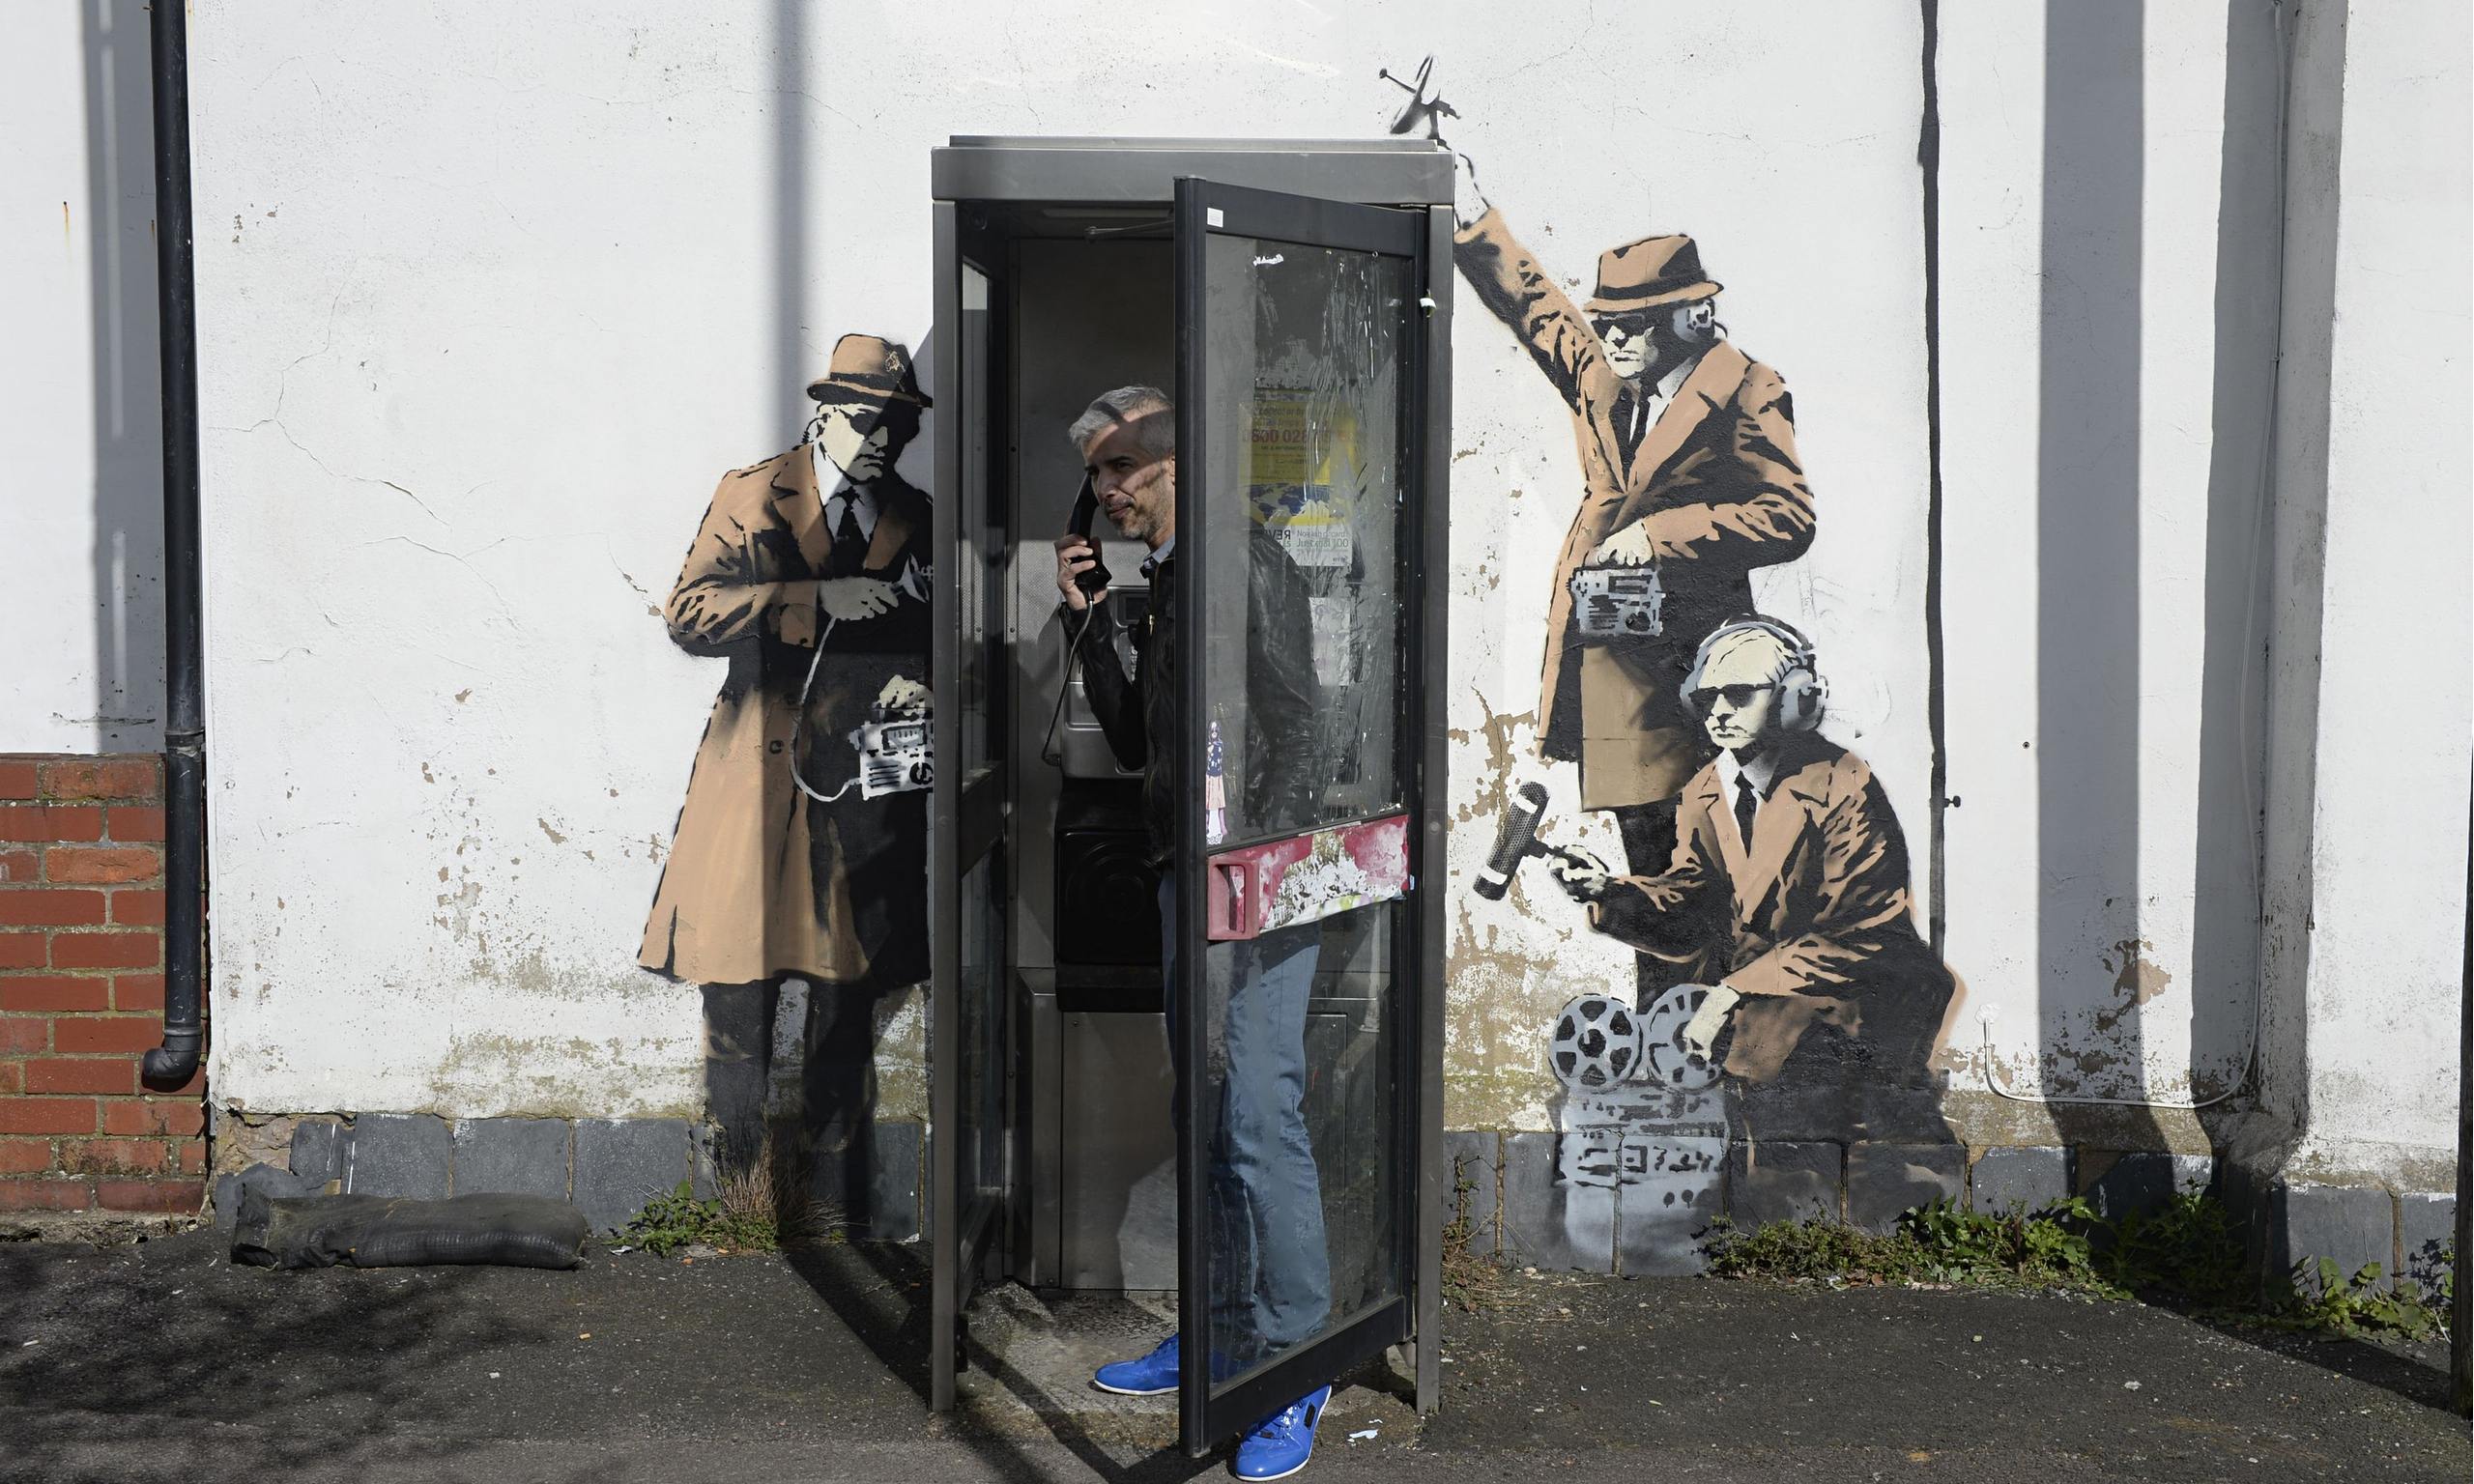 Possible Banksy work near GCHQ tackles government surveillance | Art